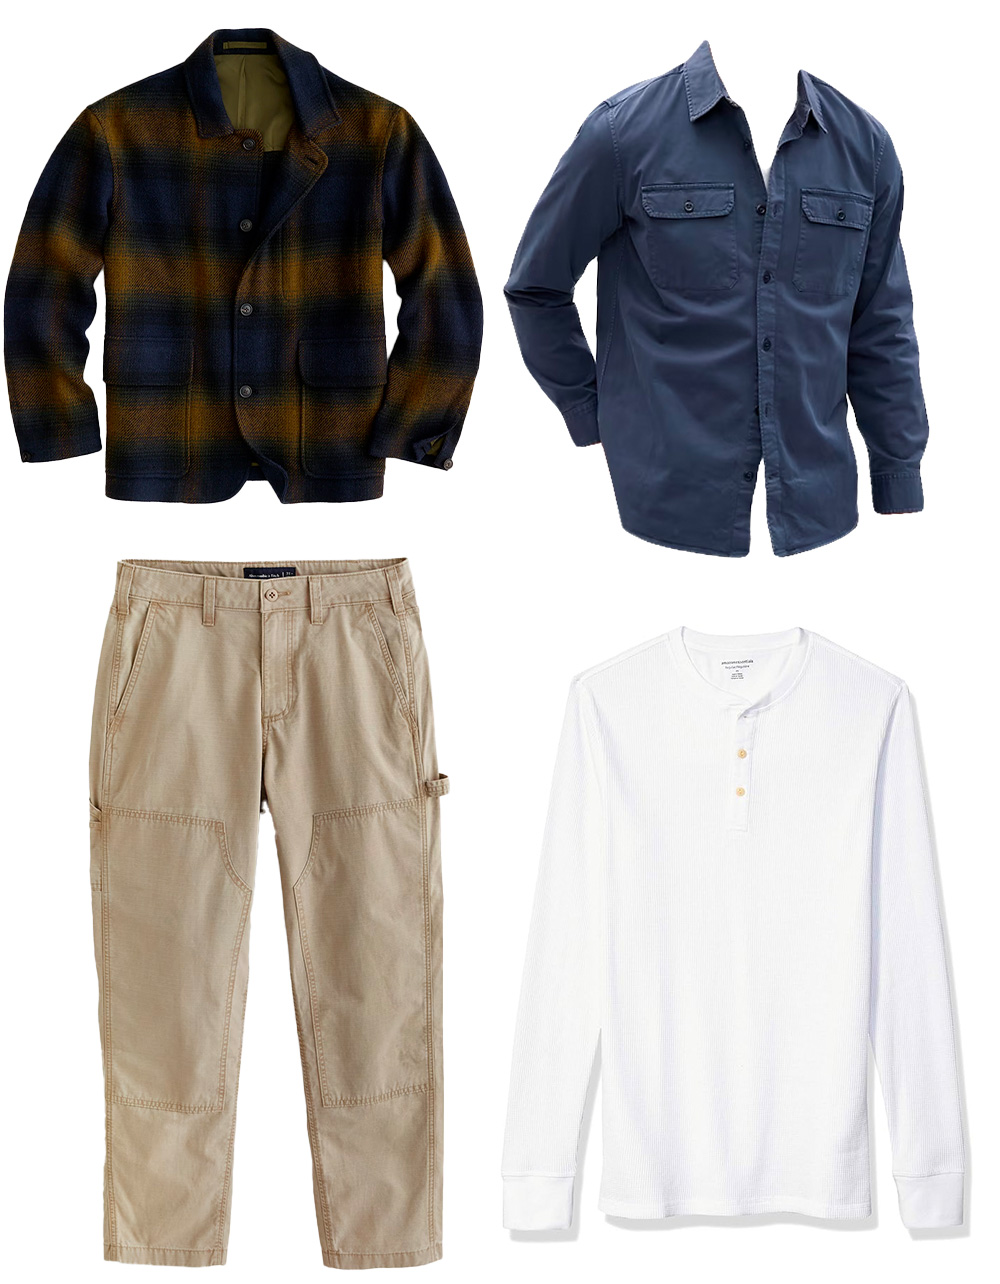 Four separate clothing pieces arranged on a white background: a dark blue and brown plaid wool jacket with buttons; a long-sleeved navy blue utility shirt with front pockets; beige utility pants with side pockets; and a white long-sleeved henley shirt.